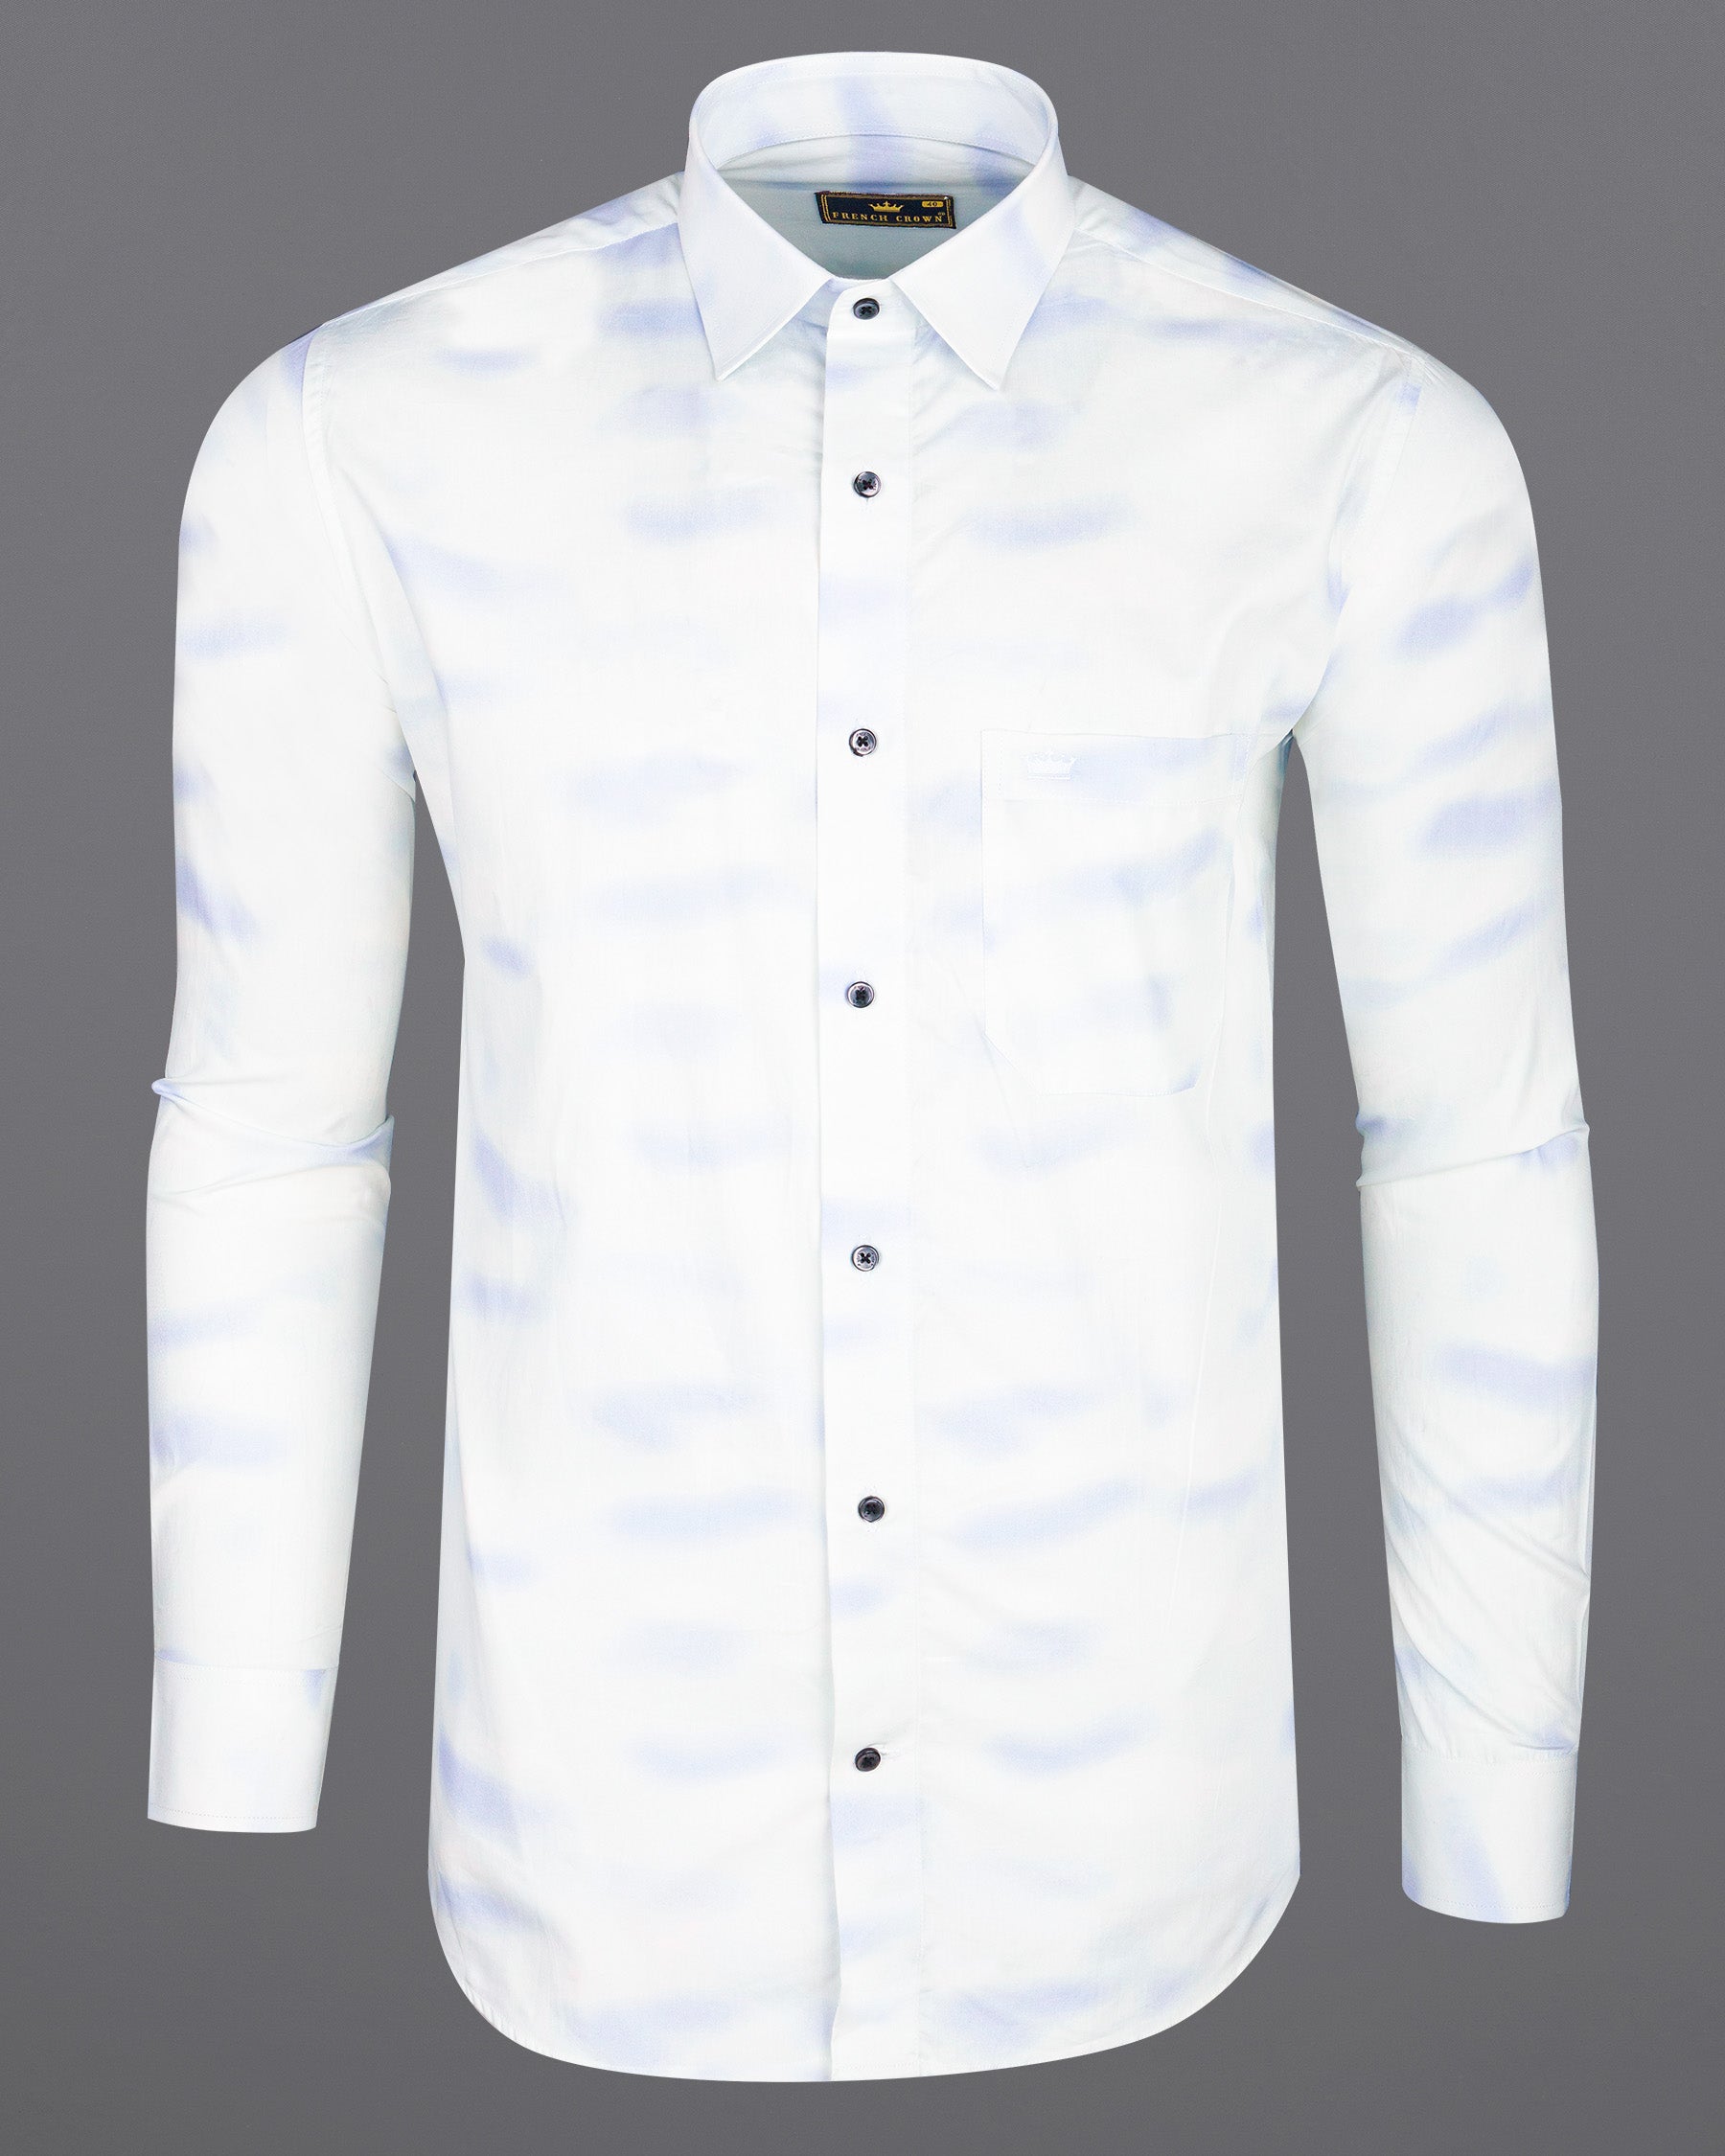 Bright White with Jagged Ice Tie Dye Print Premium Cotton Shirt 6963-BLK-38,6963-BLK-38,6963-BLK-39,6963-BLK-39,6963-BLK-40,6963-BLK-40,6963-BLK-42,6963-BLK-42,6963-BLK-44,6963-BLK-44,6963-BLK-46,6963-BLK-46,6963-BLK-48,6963-BLK-48,6963-BLK-50,6963-BLK-50,6963-BLK-52,6963-BLK-52